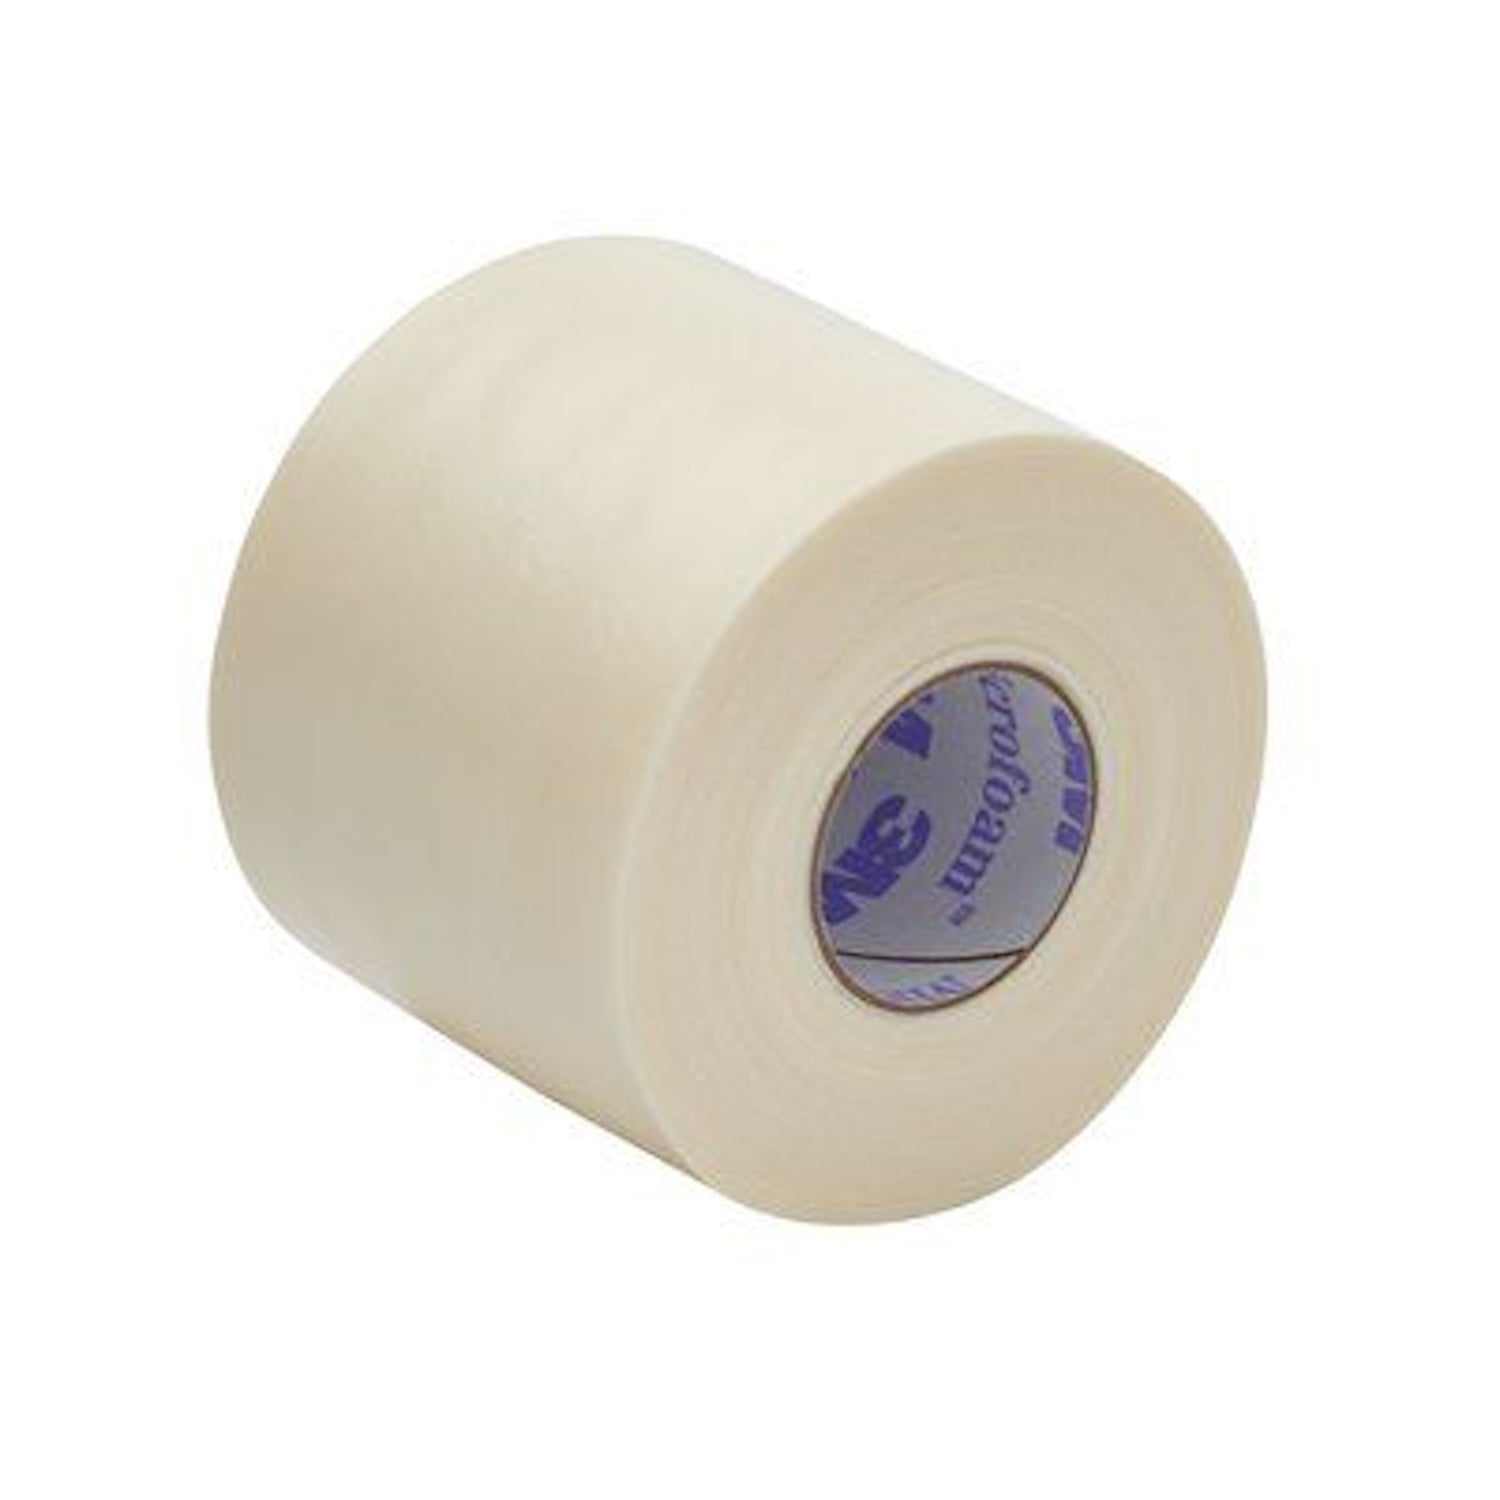 3M Microfoam Surgical Tape | 2.5cm x 5m | Pack of 12 (2)